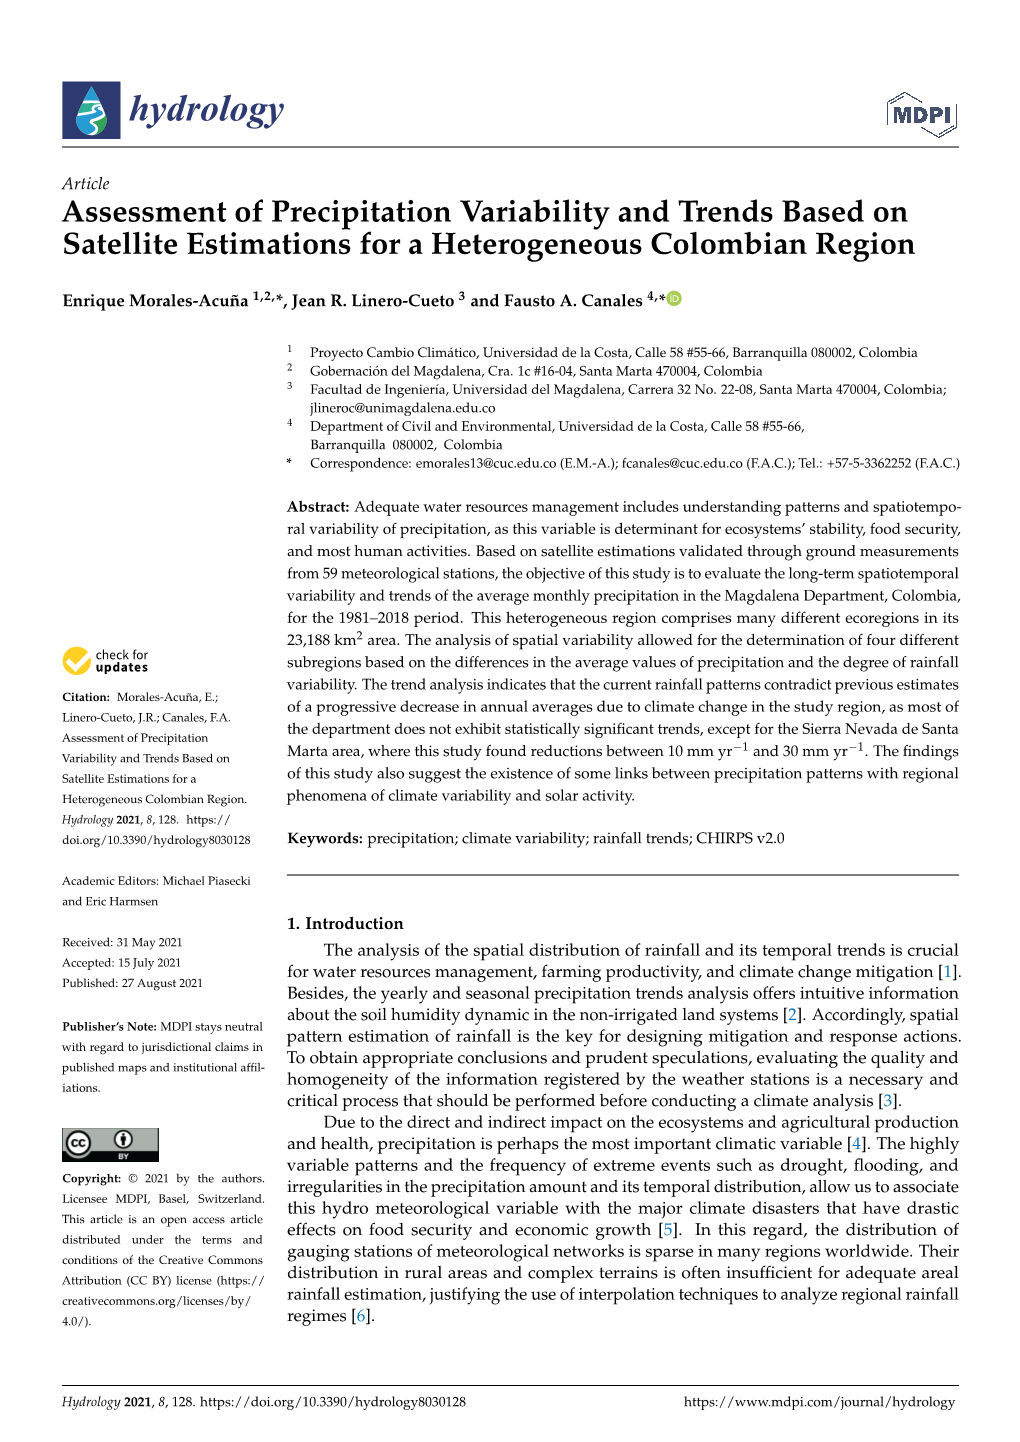 Assessment of Precipitation Variability and Trends Based on Satellite Estimations for a Heterogeneous Colombian Region